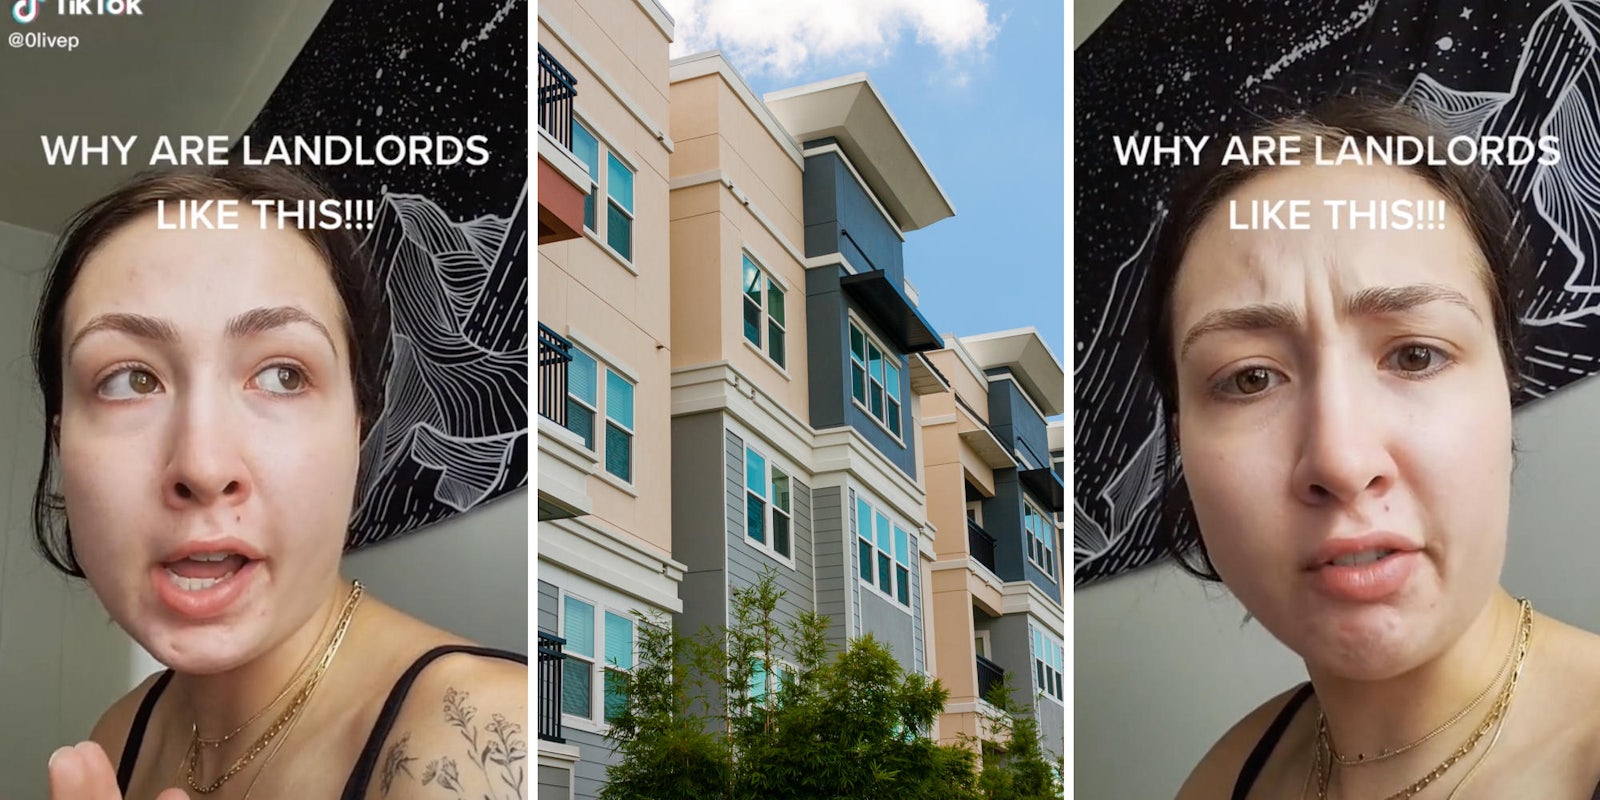 brunette woman talking in a room (l) apartment buildings (c) woman looking confused (r)